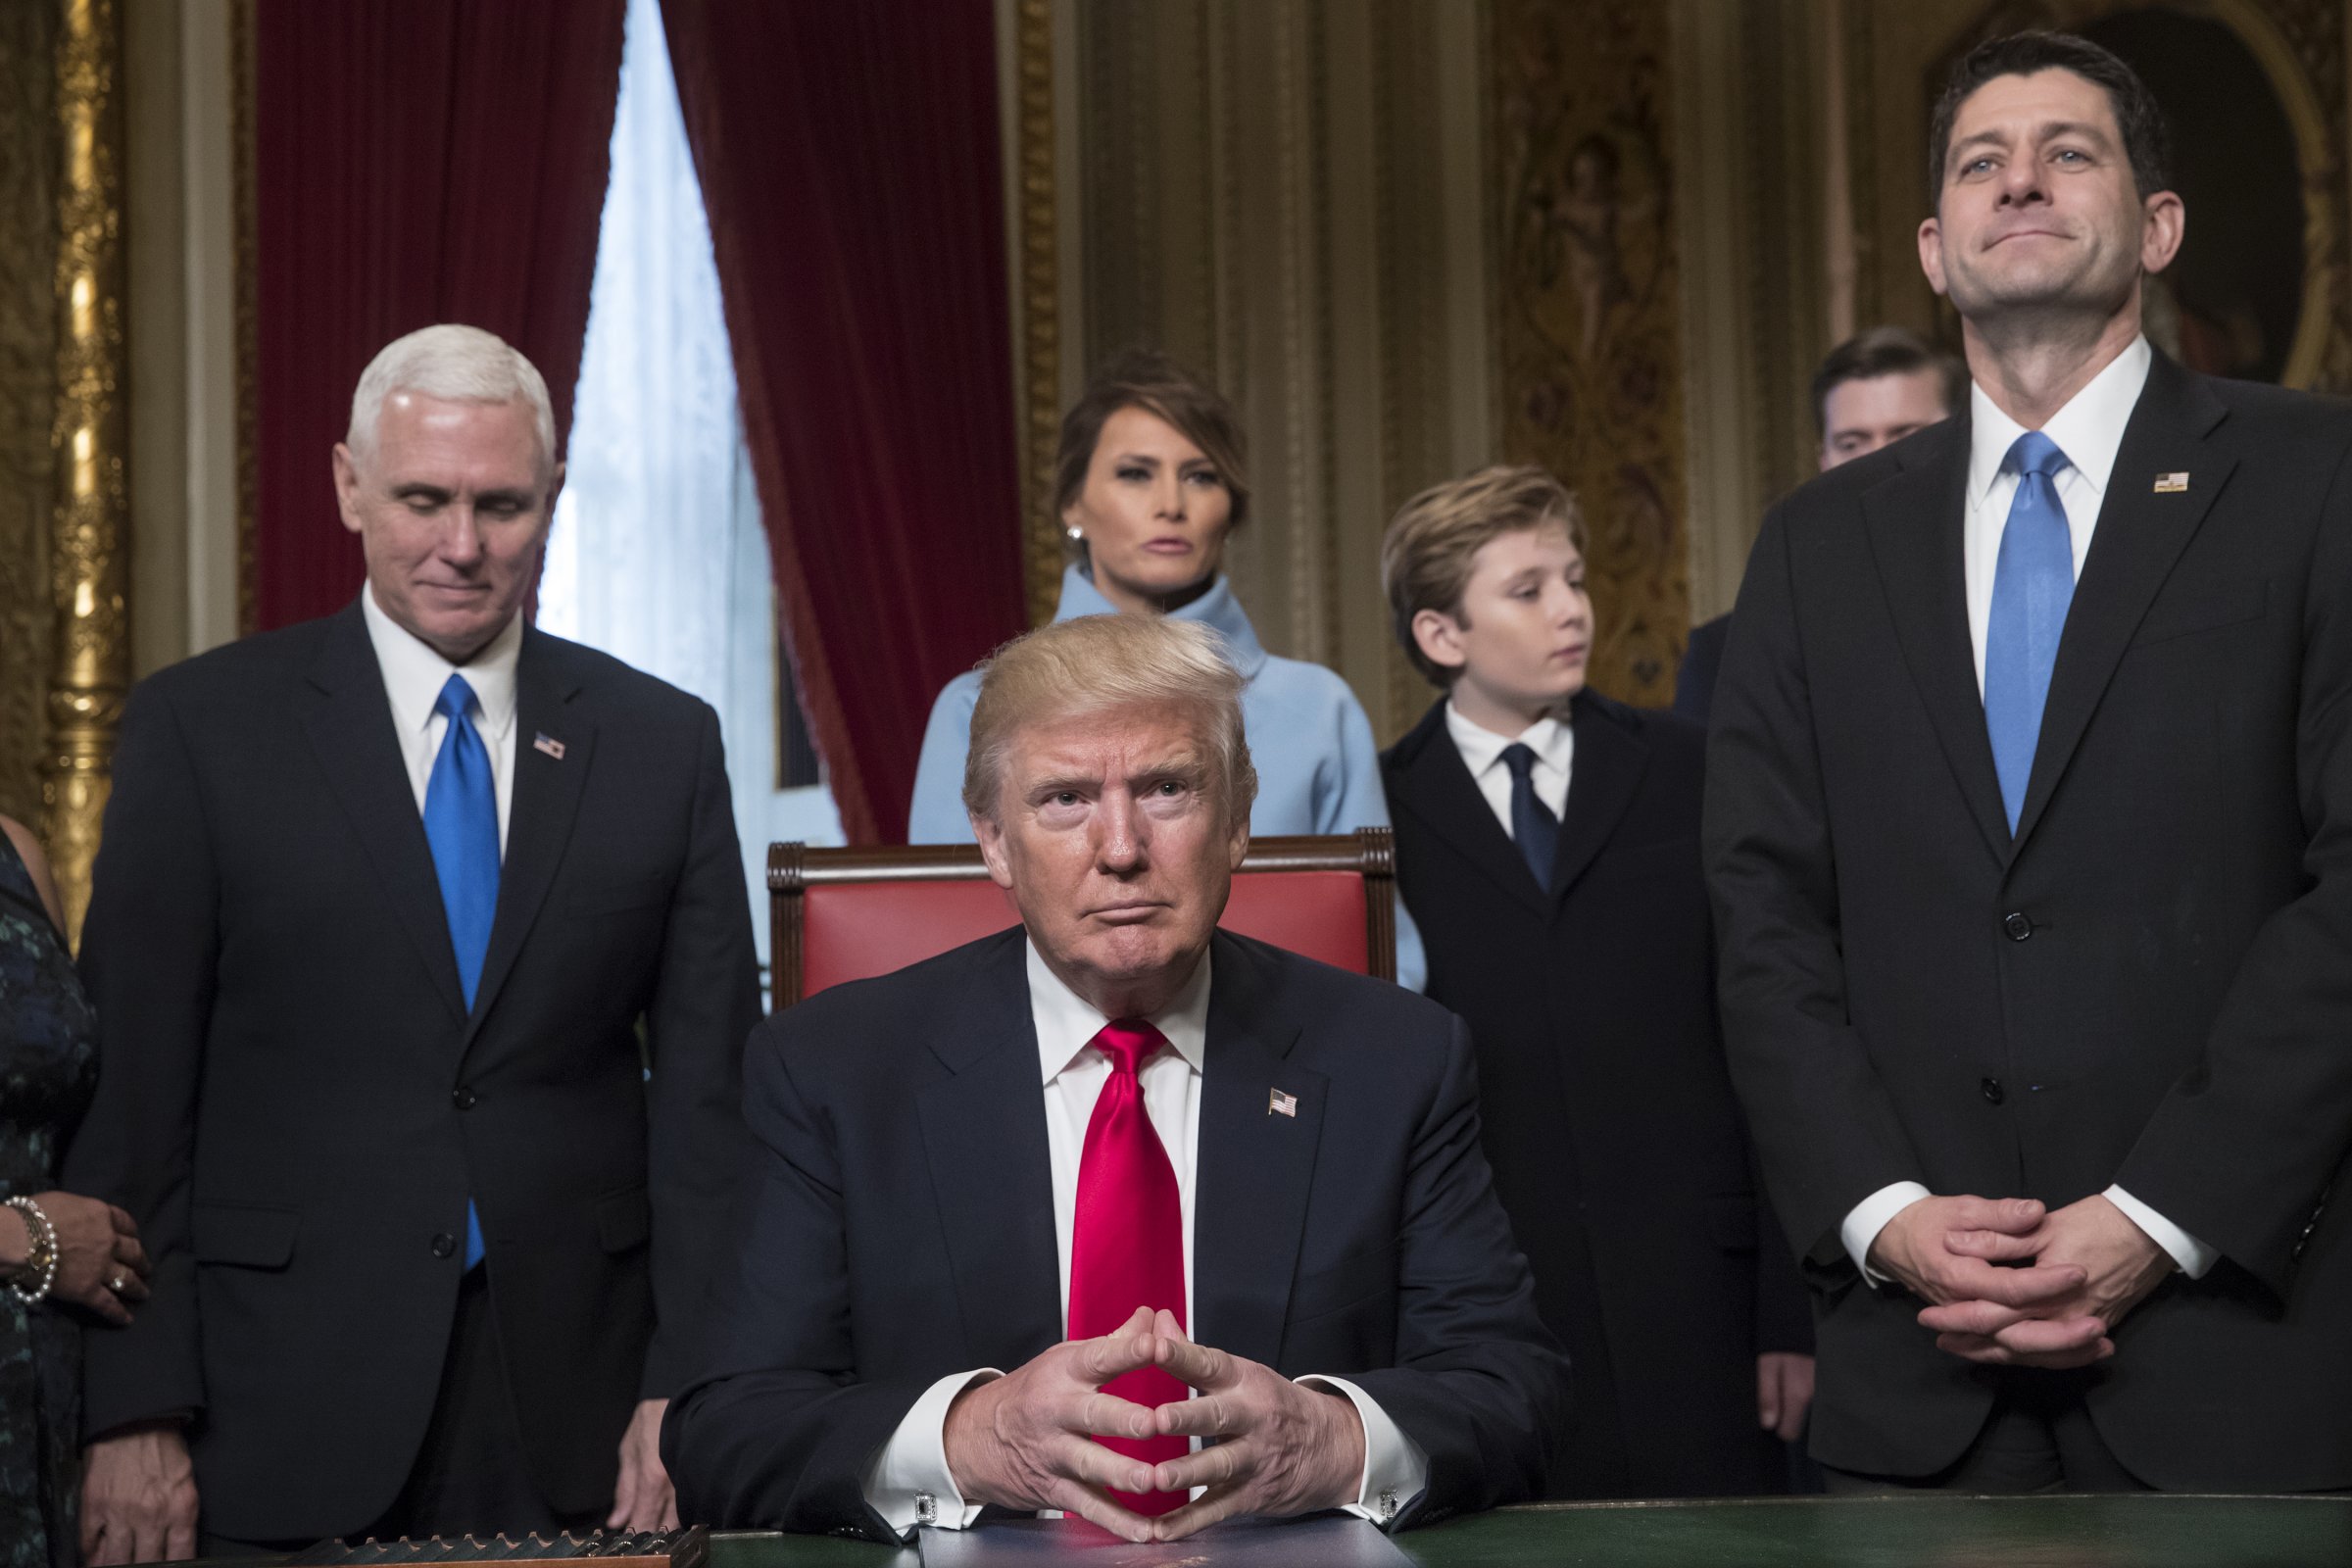 U.S. President Donald Trump, center, sits before formally signing his cabinet nominations into law with Vice President Mike Pence, left, and U.S. House Speaker Paul Ryan, a Republican from Wisconsin, during the 58th presidential inauguration in Washington, D.C., U.S., on Friday, Jan. 20, 2017.